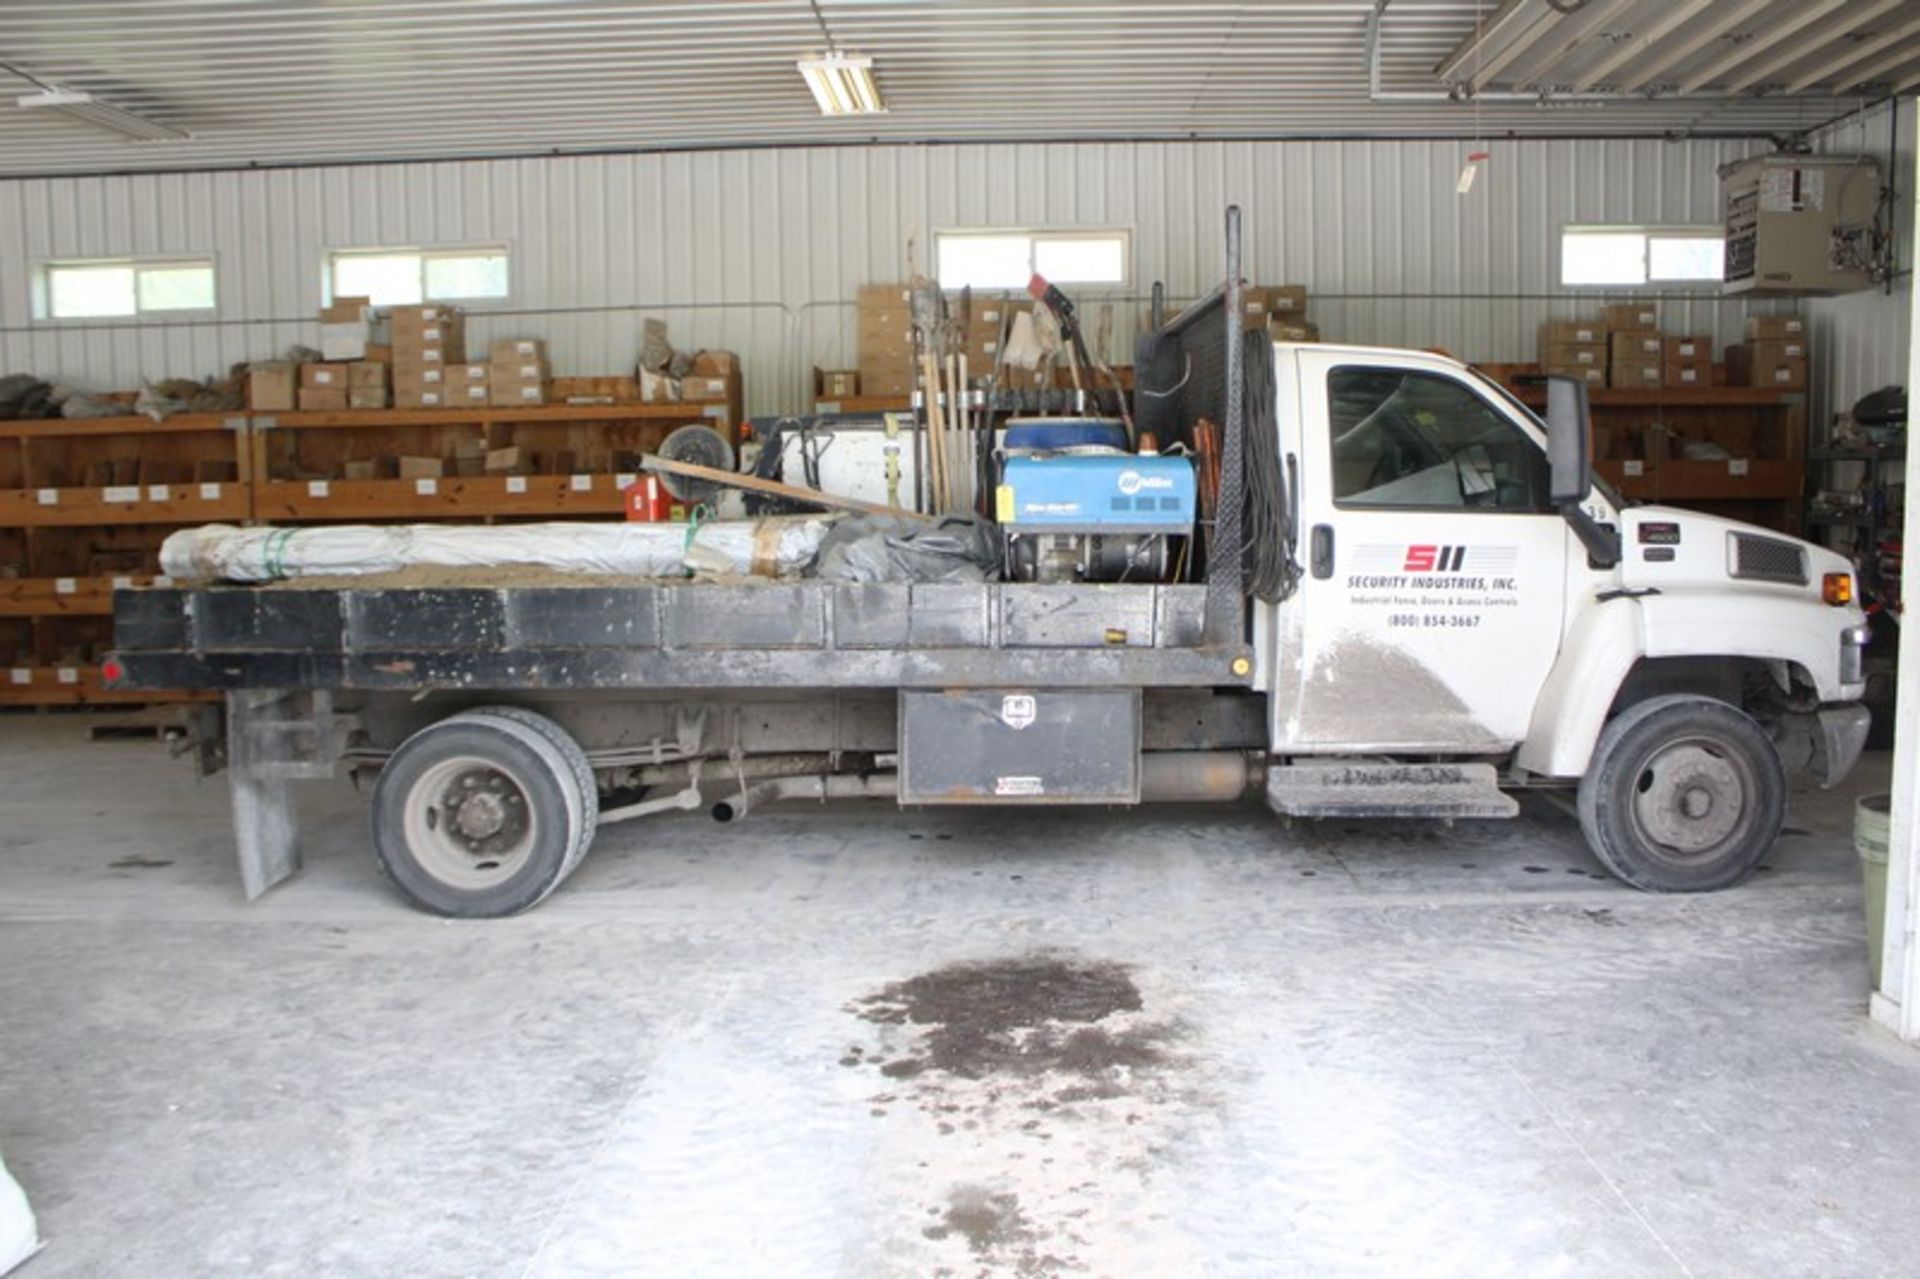 2005 GMC MODEL C4500 FLAT BED TRUCK, VIN 1GDE4C1255F516303, 14' WOOD DECK WITH UTILITY BOX,